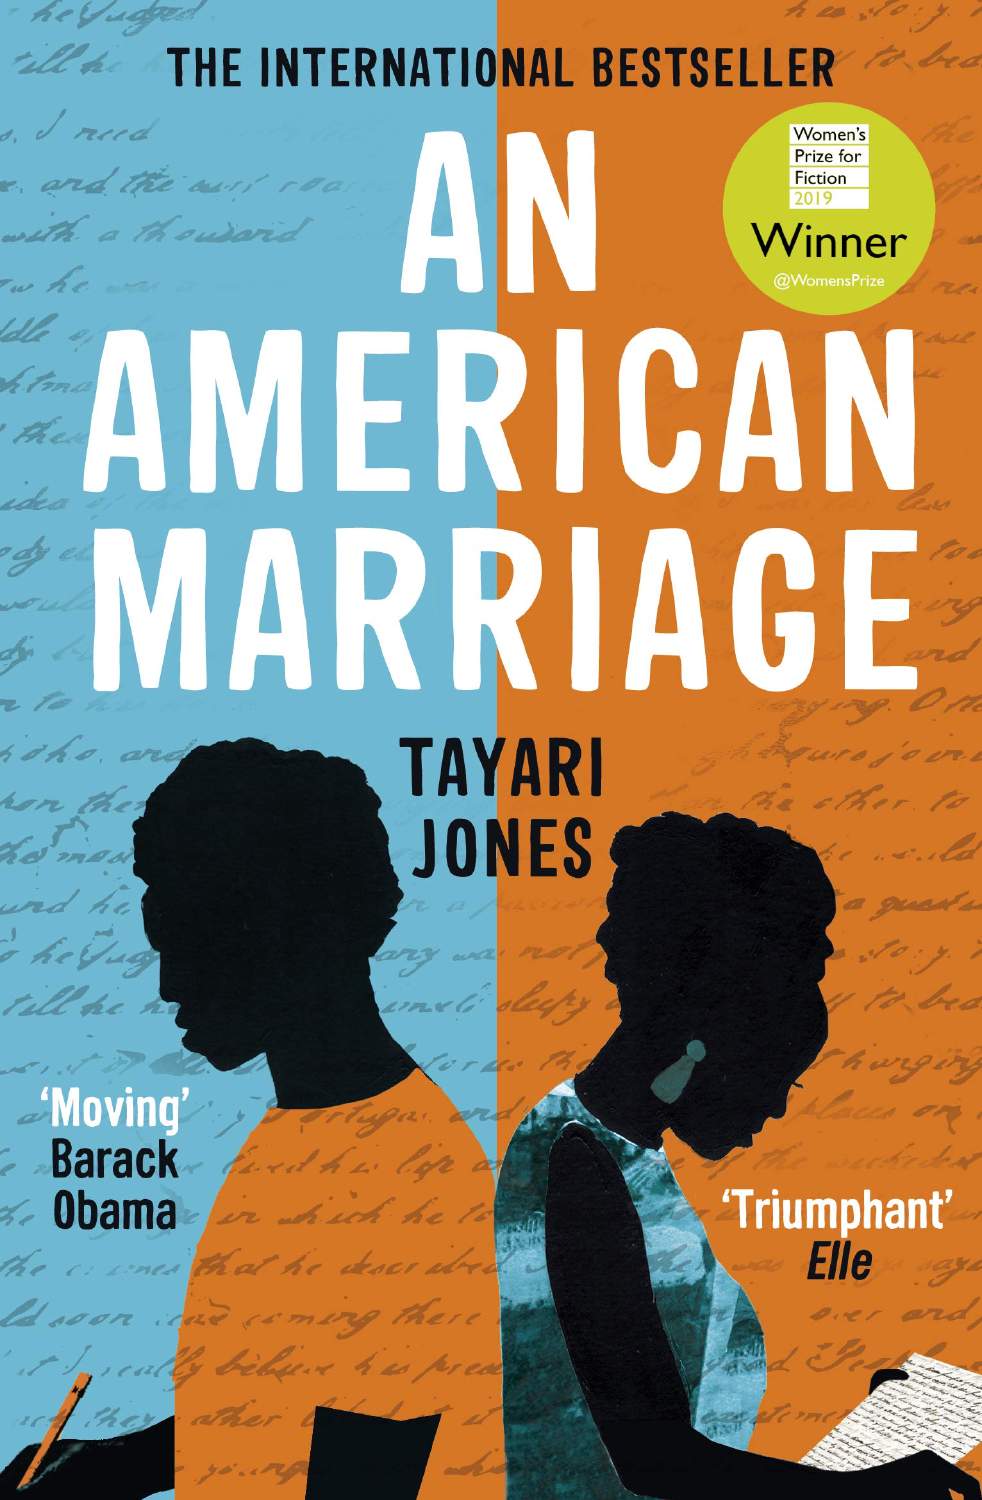 A World Of Voices: An American Marriage